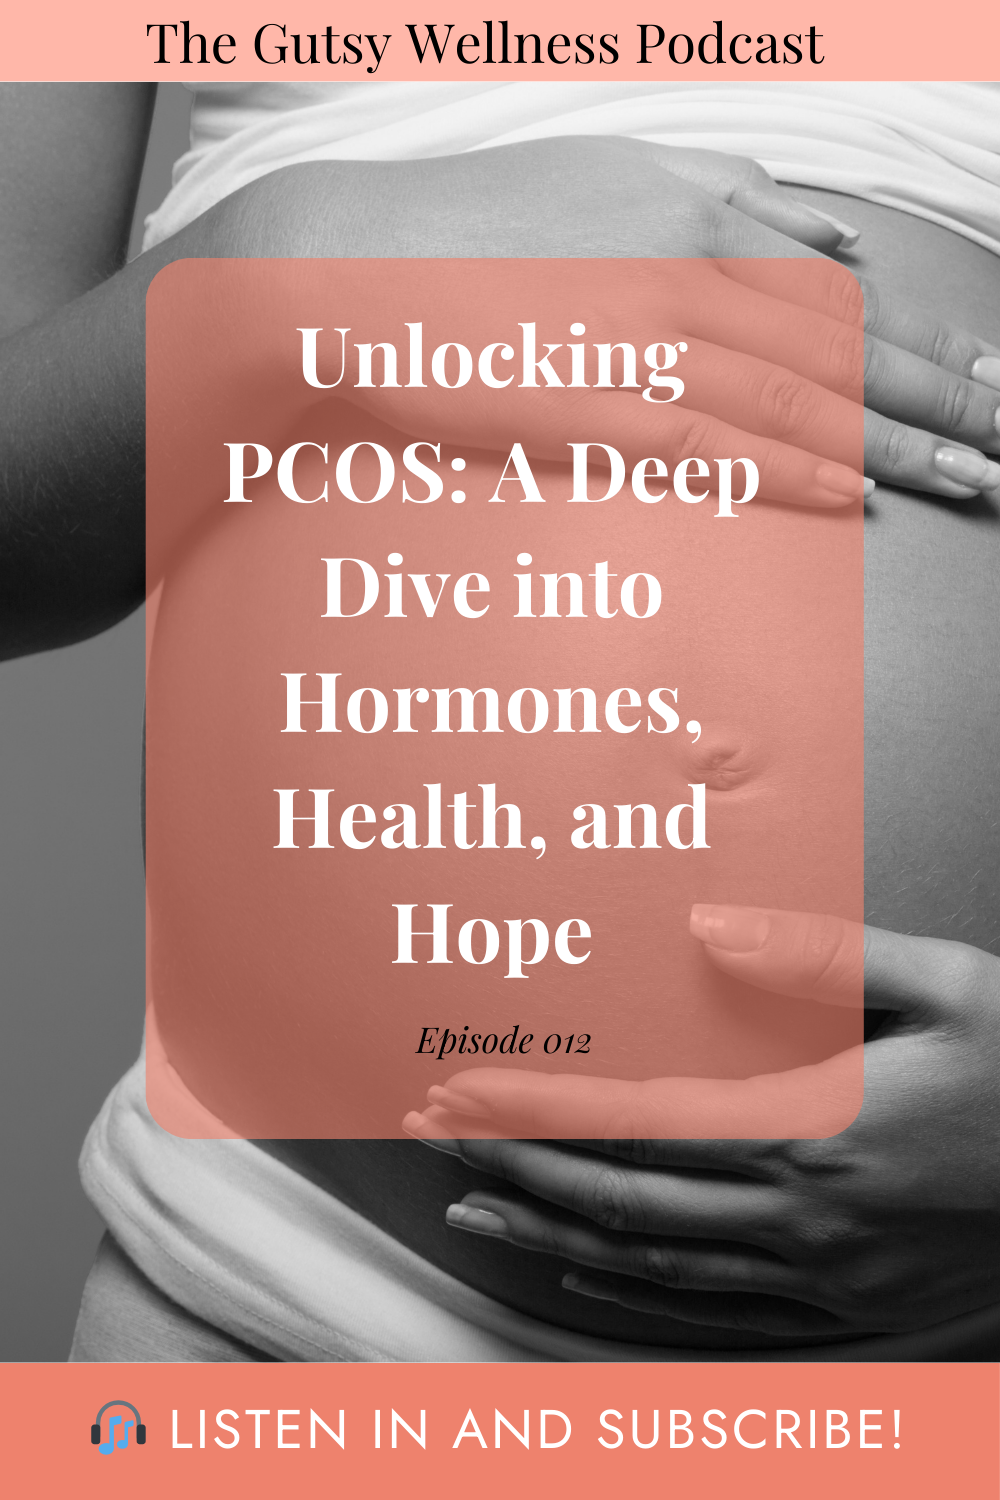 Unlocking PCOS: A Deep Dive into Hormones, Health, and Hope